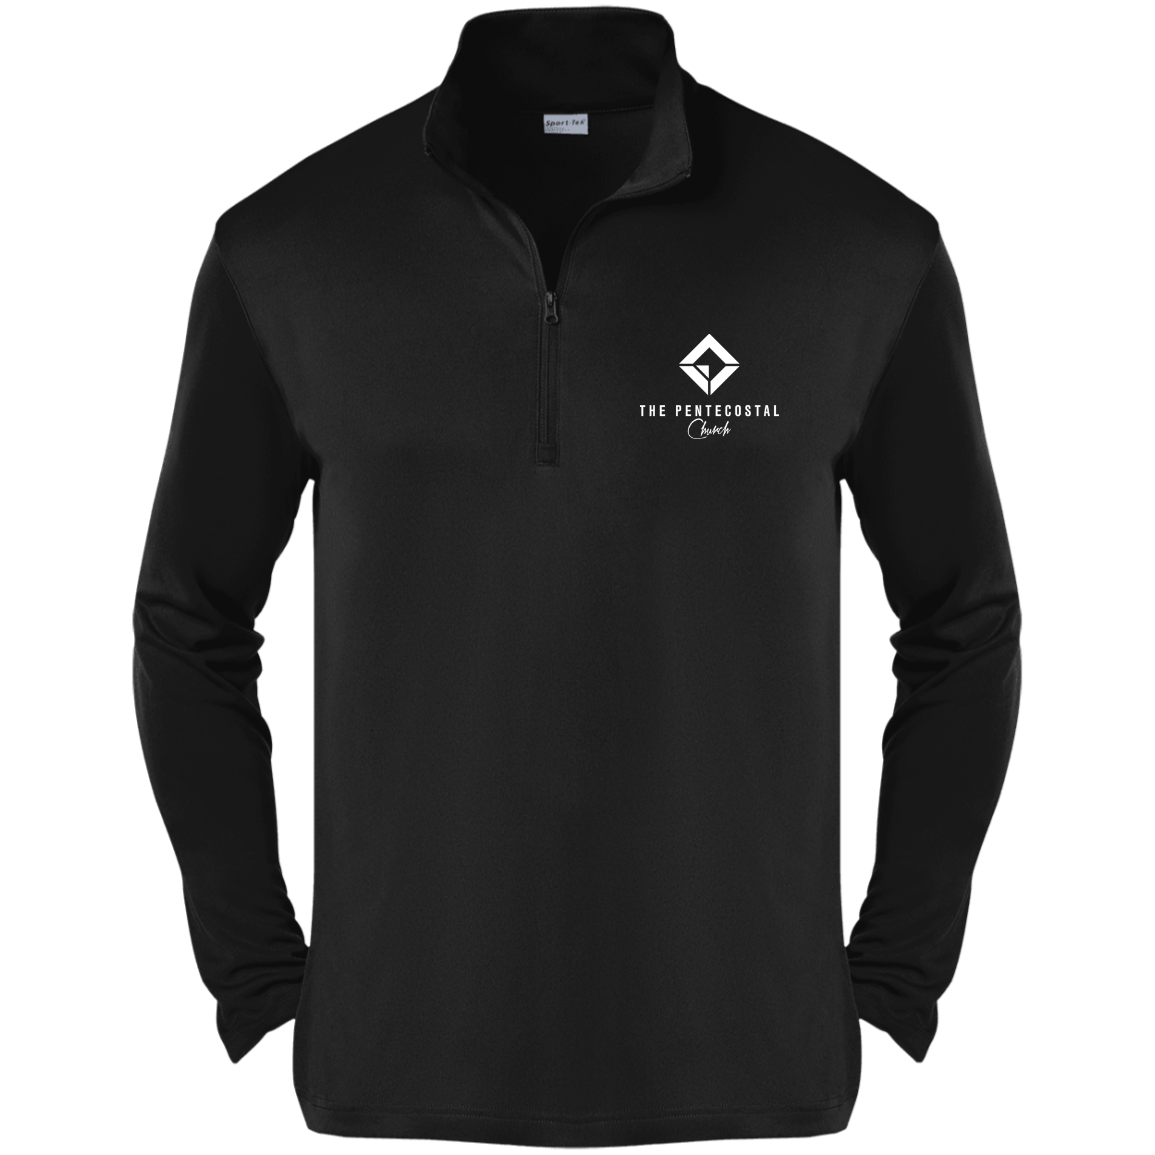 The Pentecostal Church Competitor 1/4-Zip Pullover